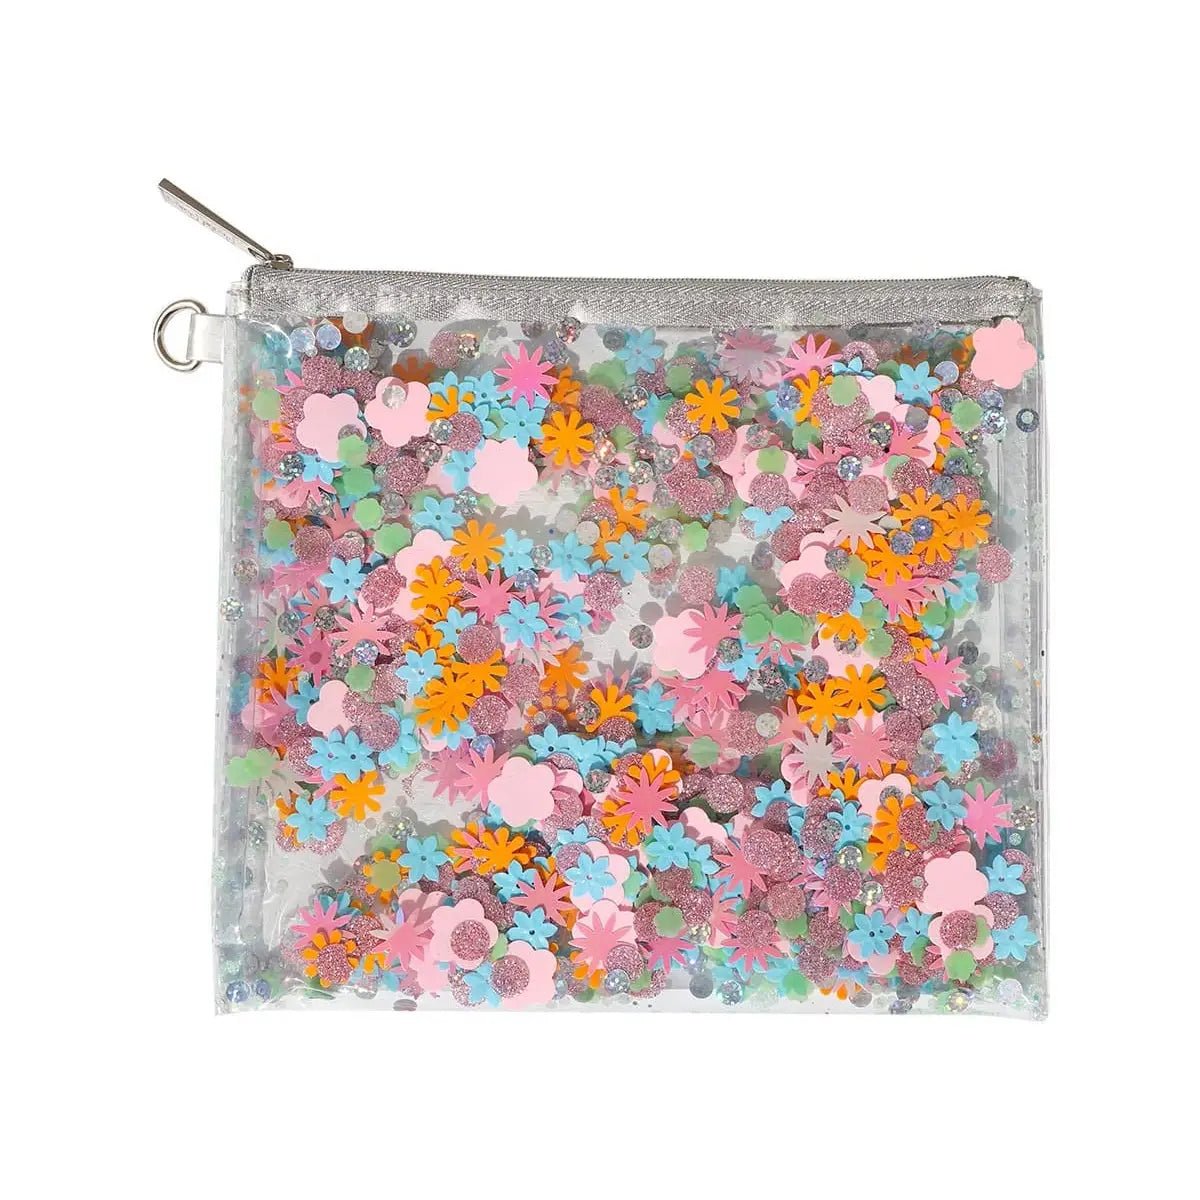 Shop Packed Party Flower Shop Confetti Everything Pouch Bag - Premium Clutch Bag from Packed Party Online now at Spoiled Brat 